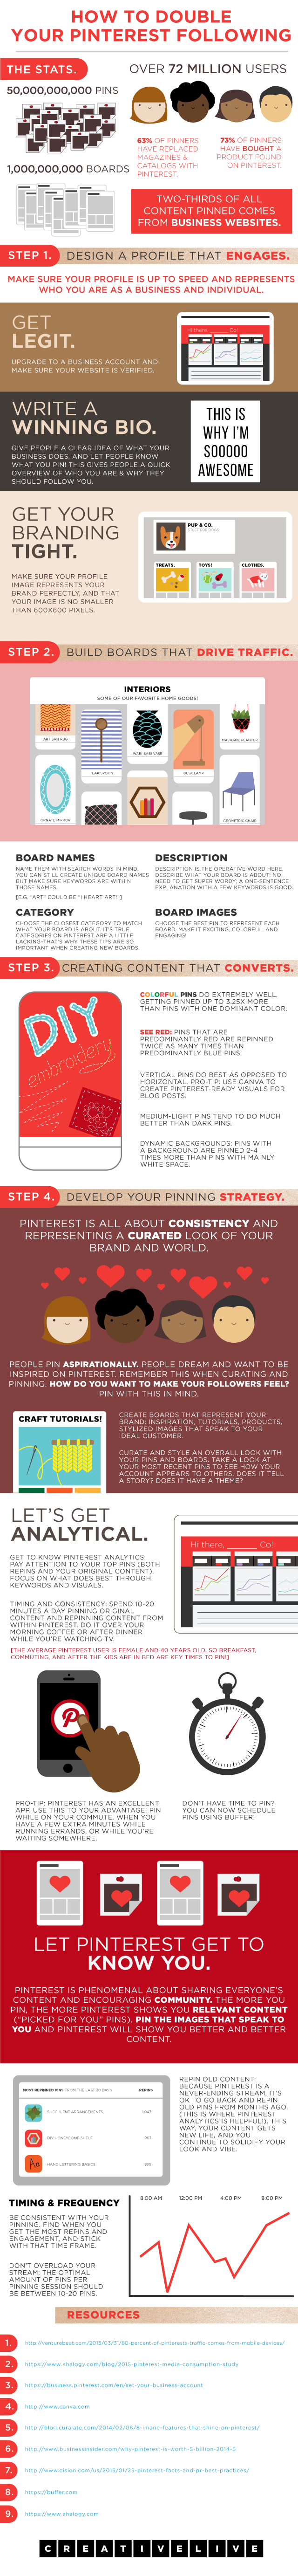 How to Get More Followers on Pinterest #infographic